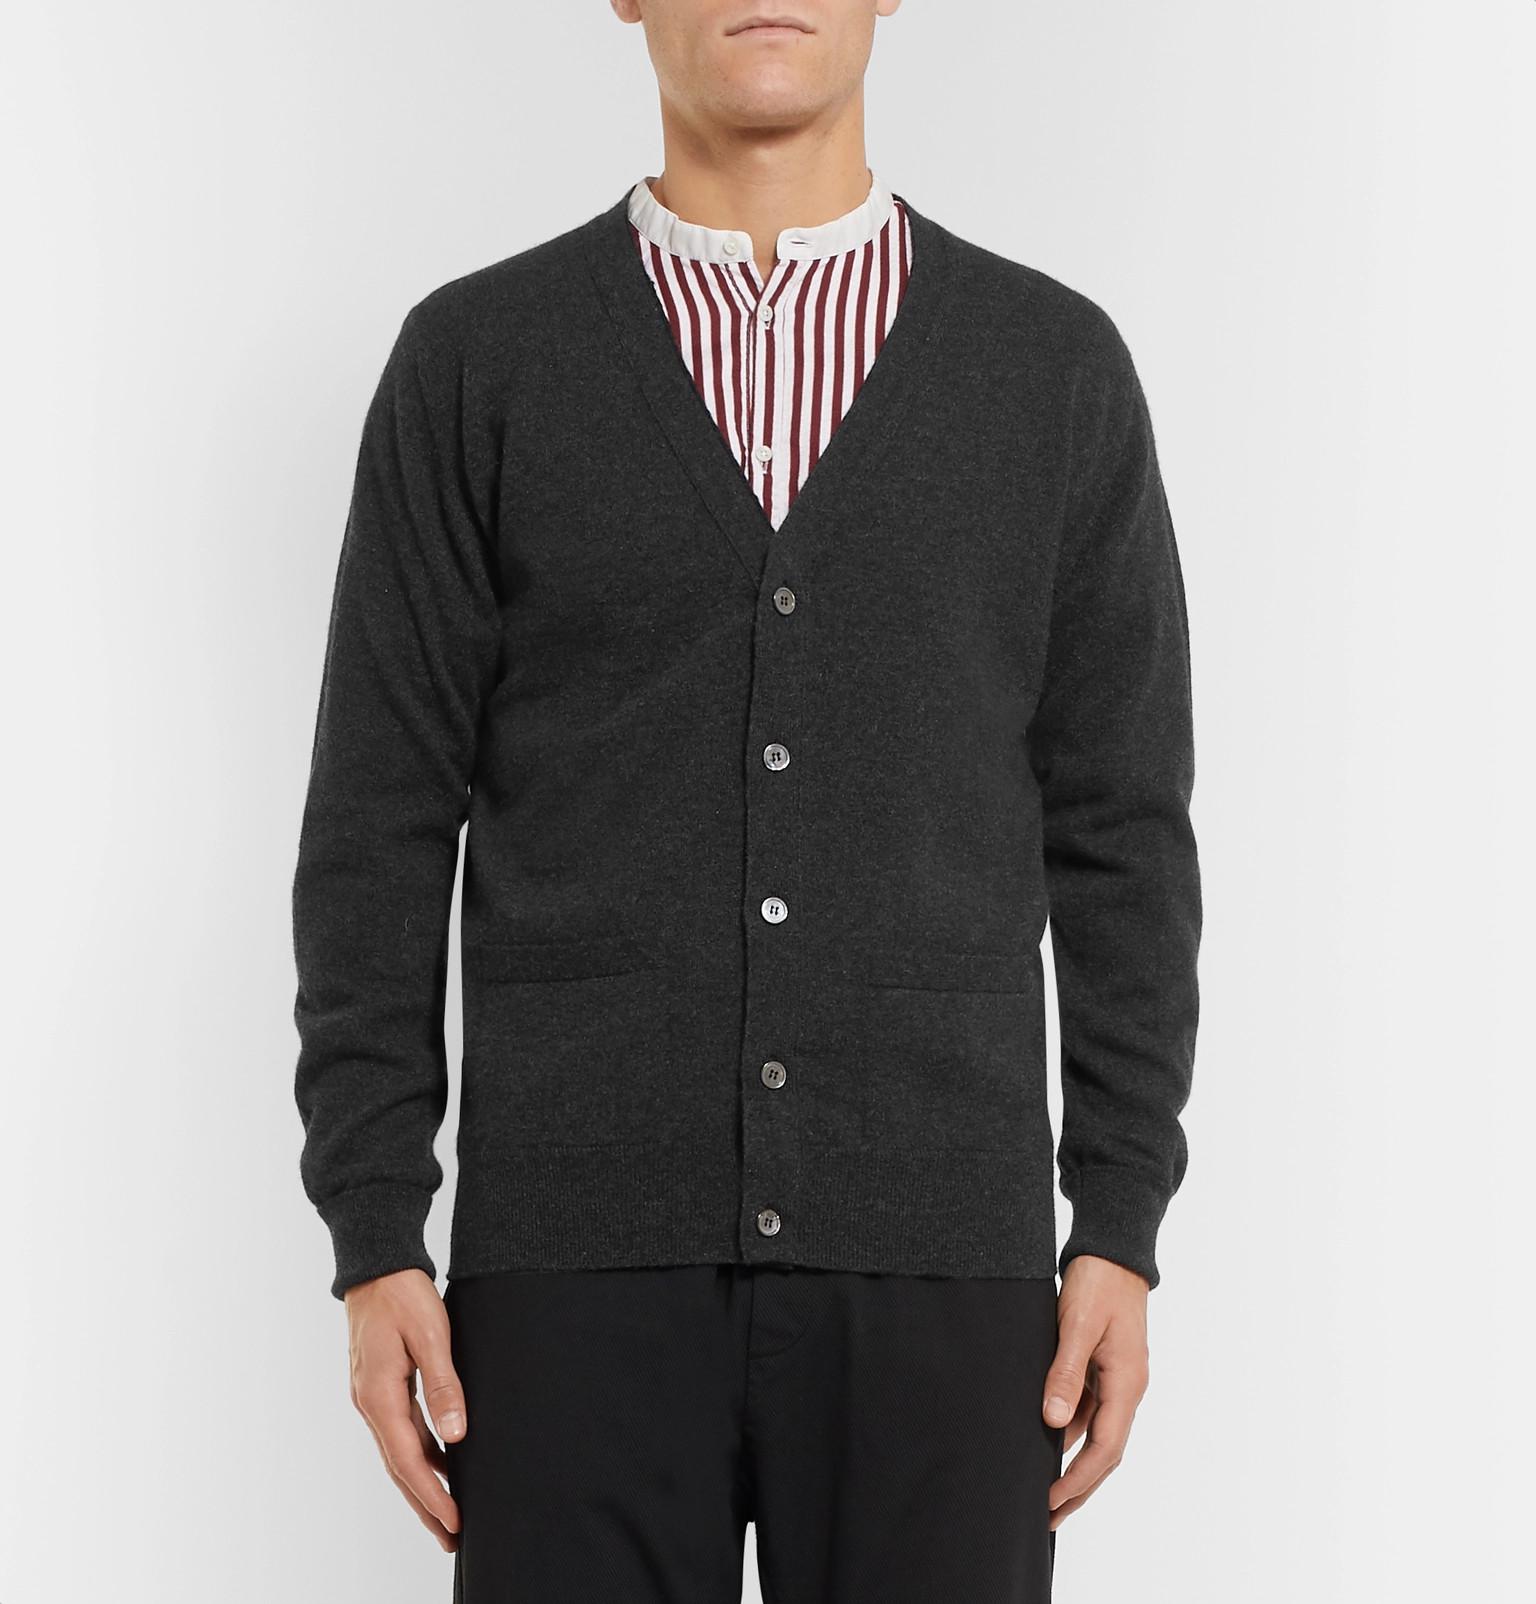 William Lockie Oxton Cashmere Cardigan in Charcoal (Grey) for Men - Lyst